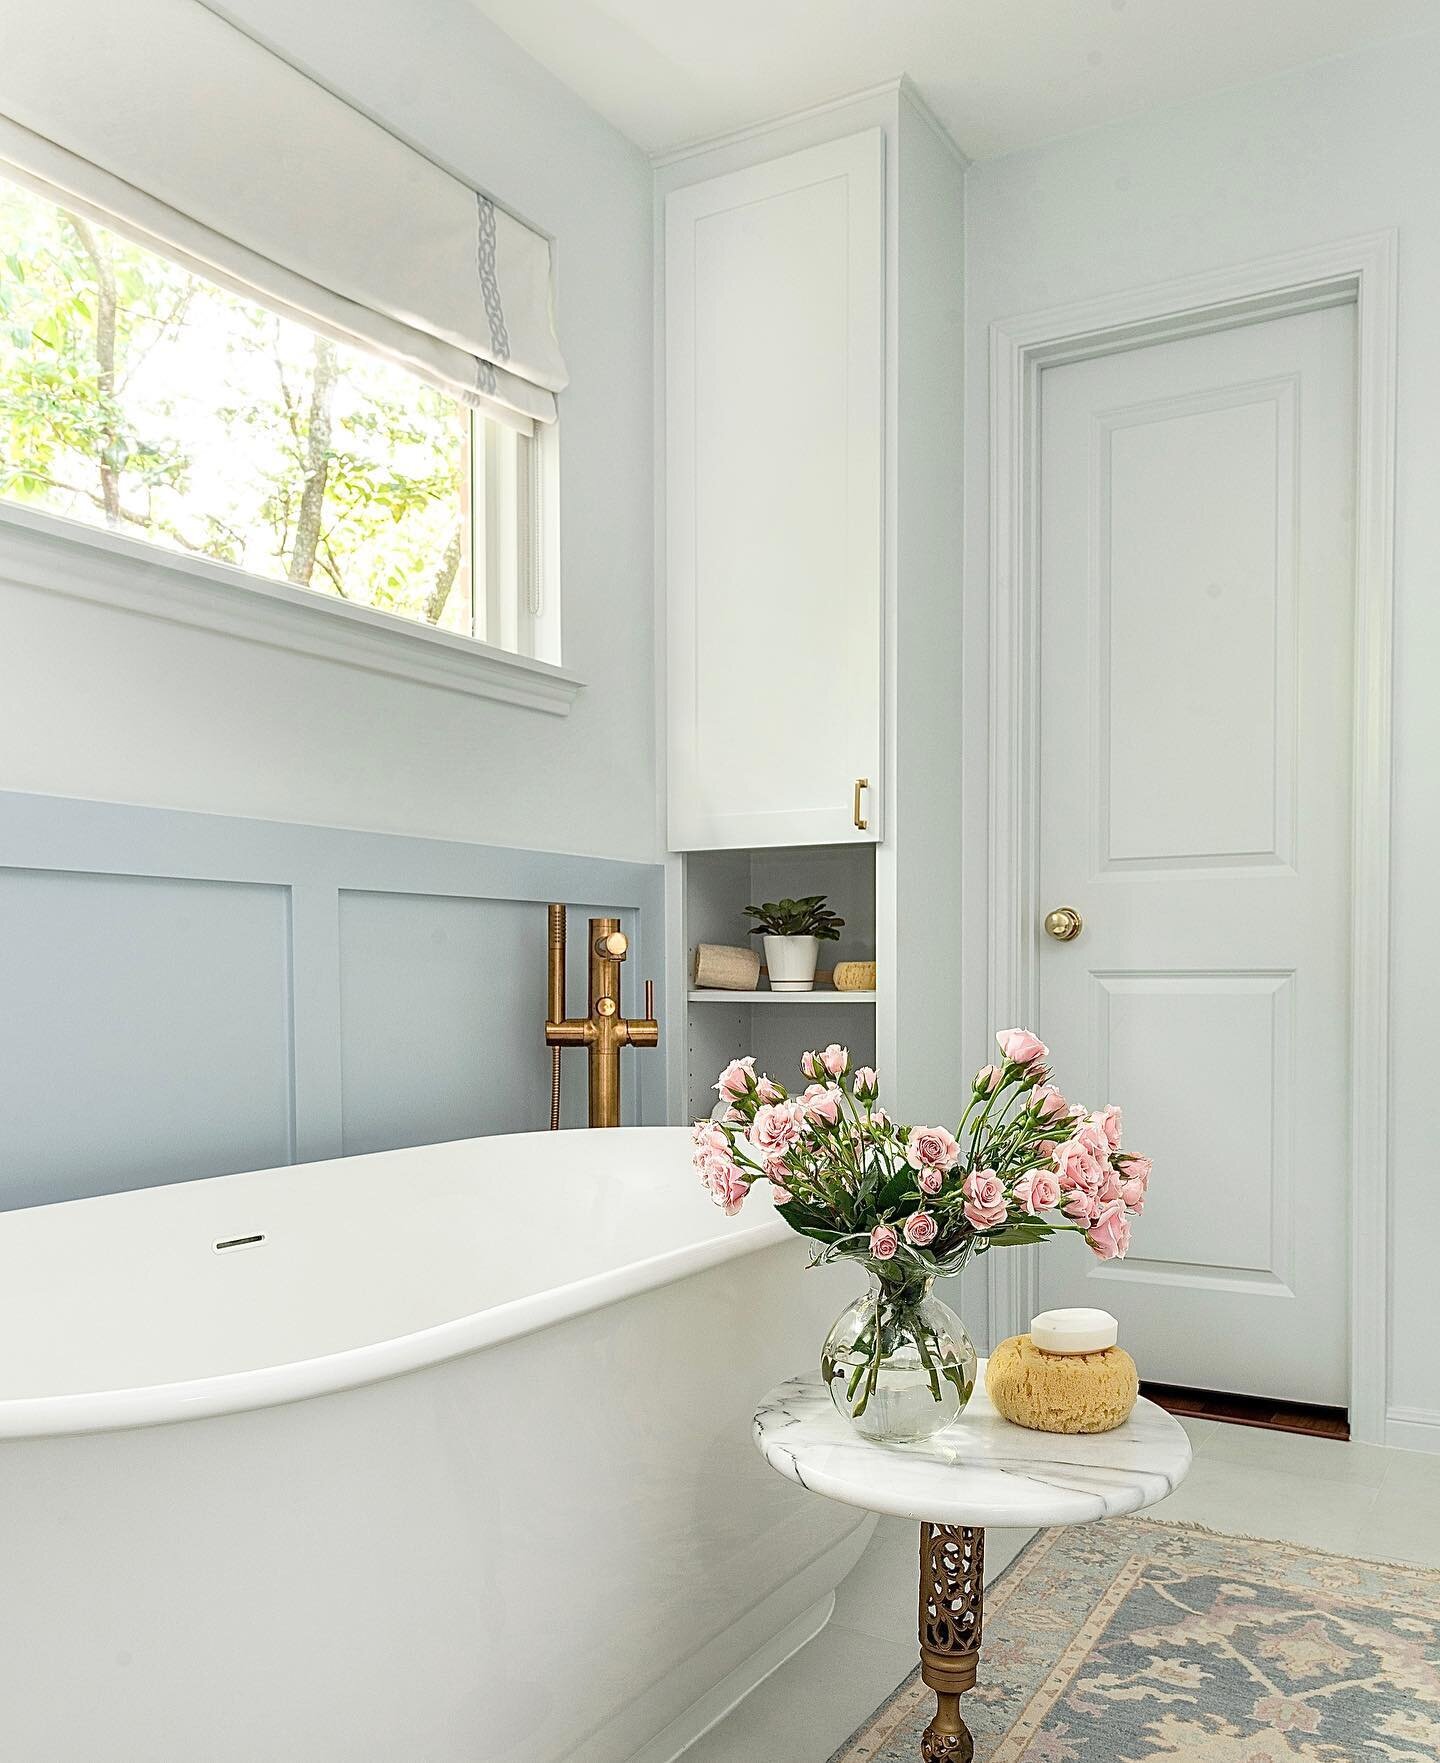 There&rsquo;s nothing like a serene place to soak.  I love how this quaint respite turned for our client. 
@ryanphotoart @greymarkconstruction 
.
.
.
.
.
.
#designerfornewconstruction

#interiordesignforrenovations
#interiorinspo
#interiordesign #lux